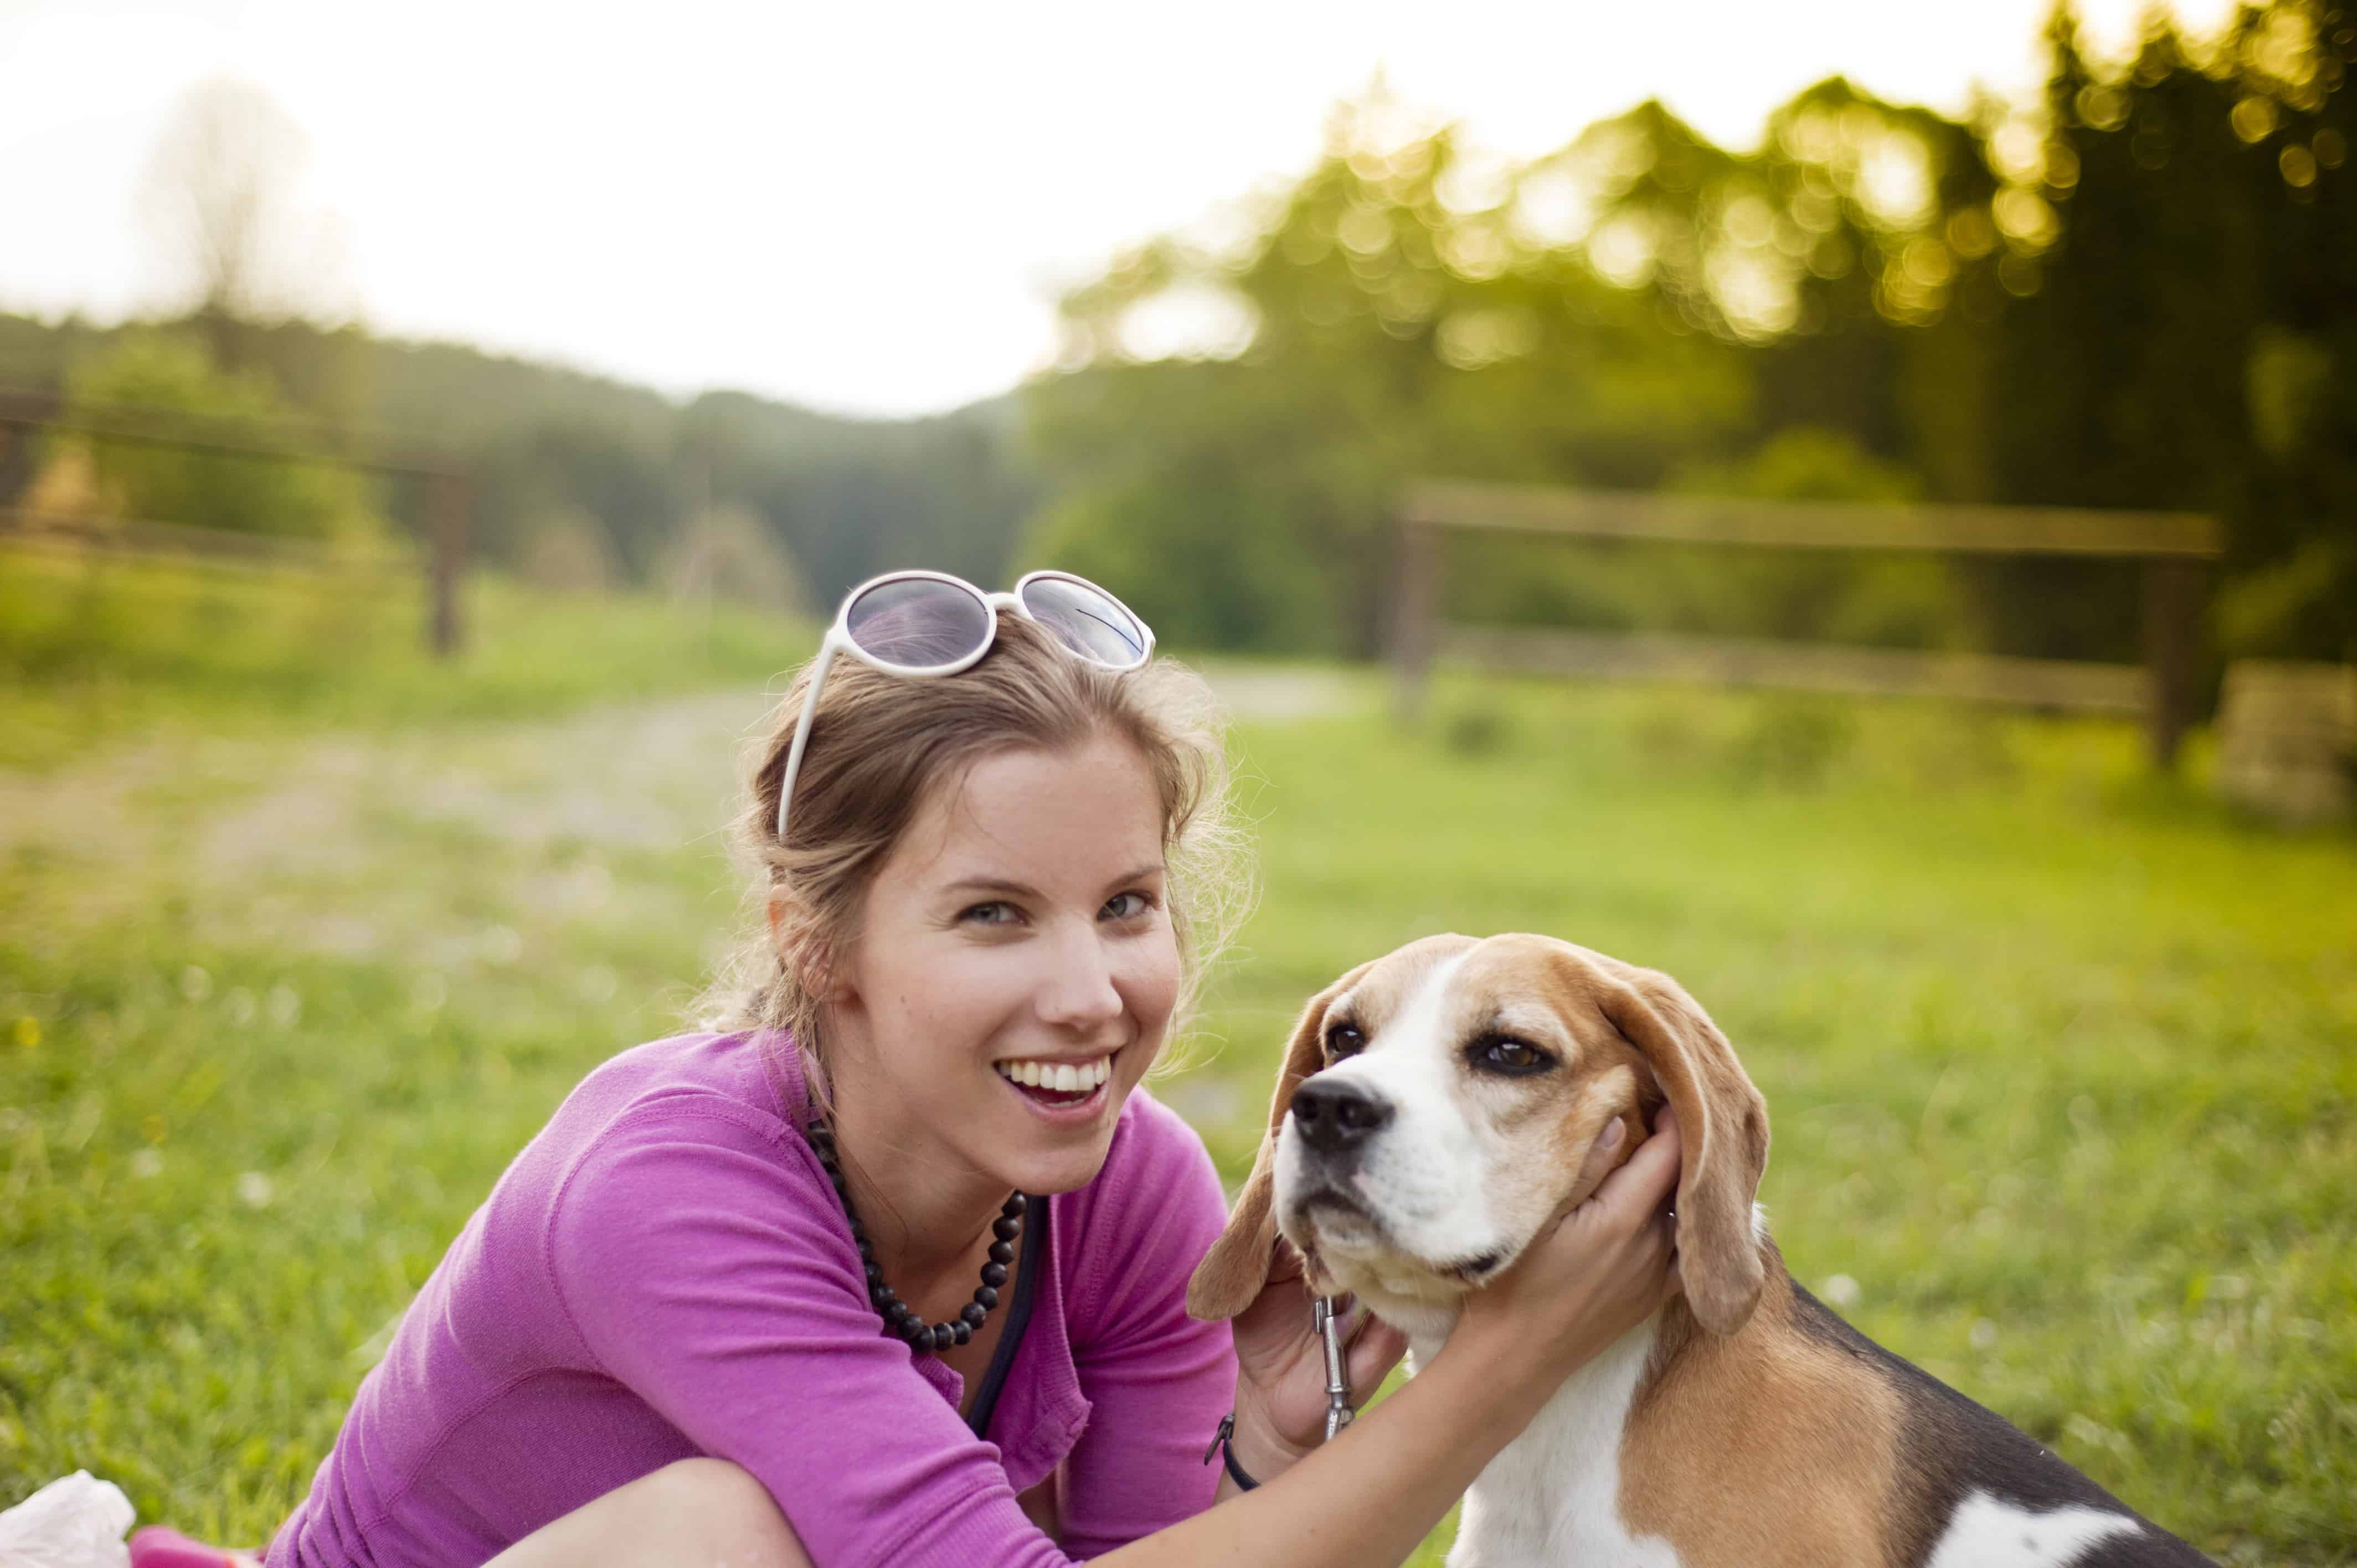 HomeBased Dog Sitting Jobs with